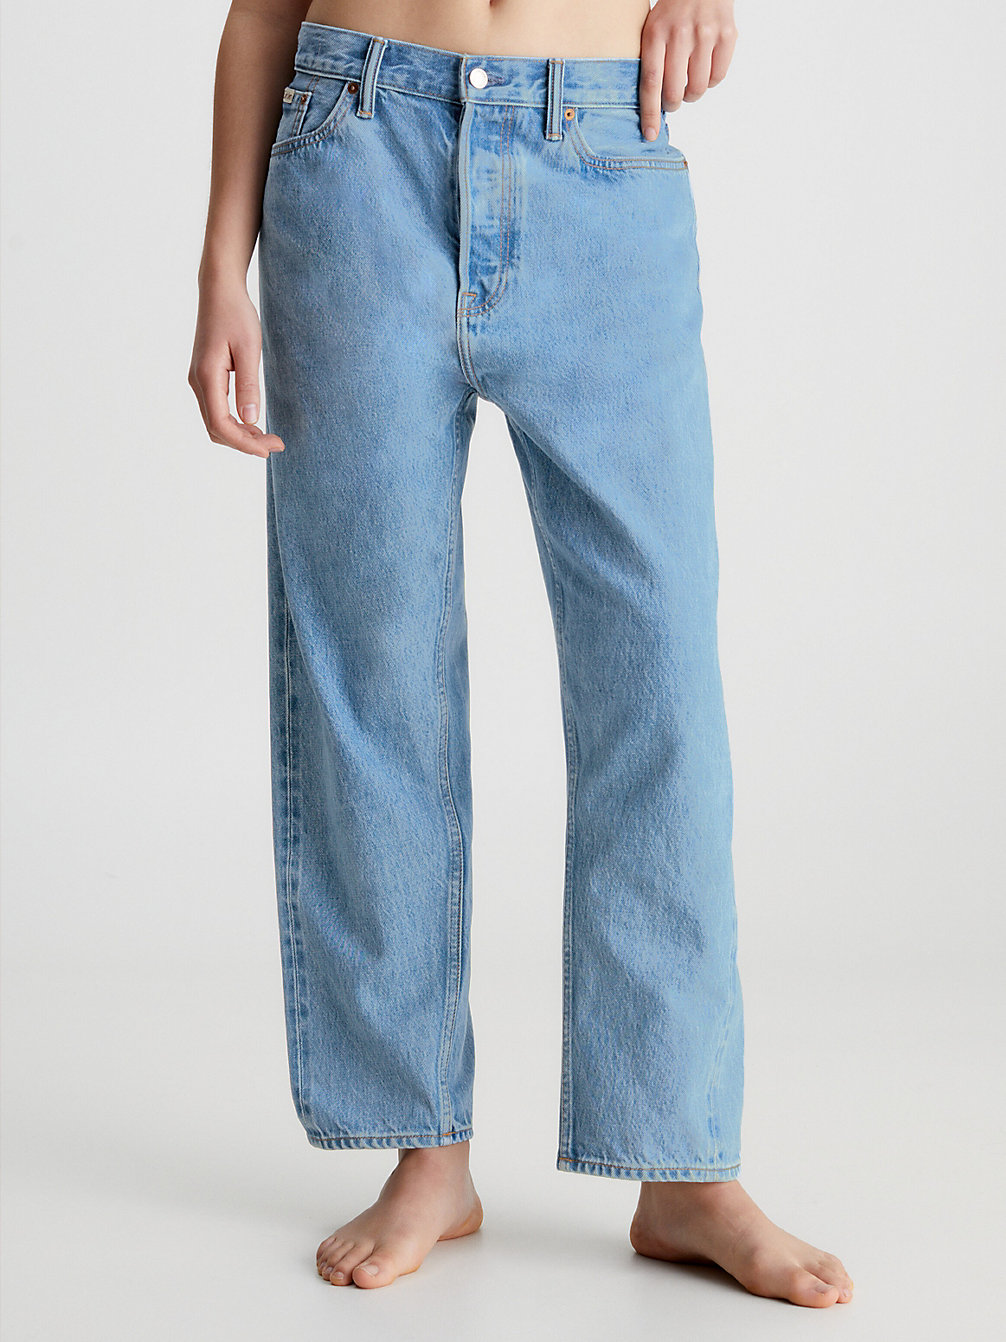 Unisex Relaxed Jeans - CK Standards > COASTAL BLUE > undefined hombre > Calvin Klein